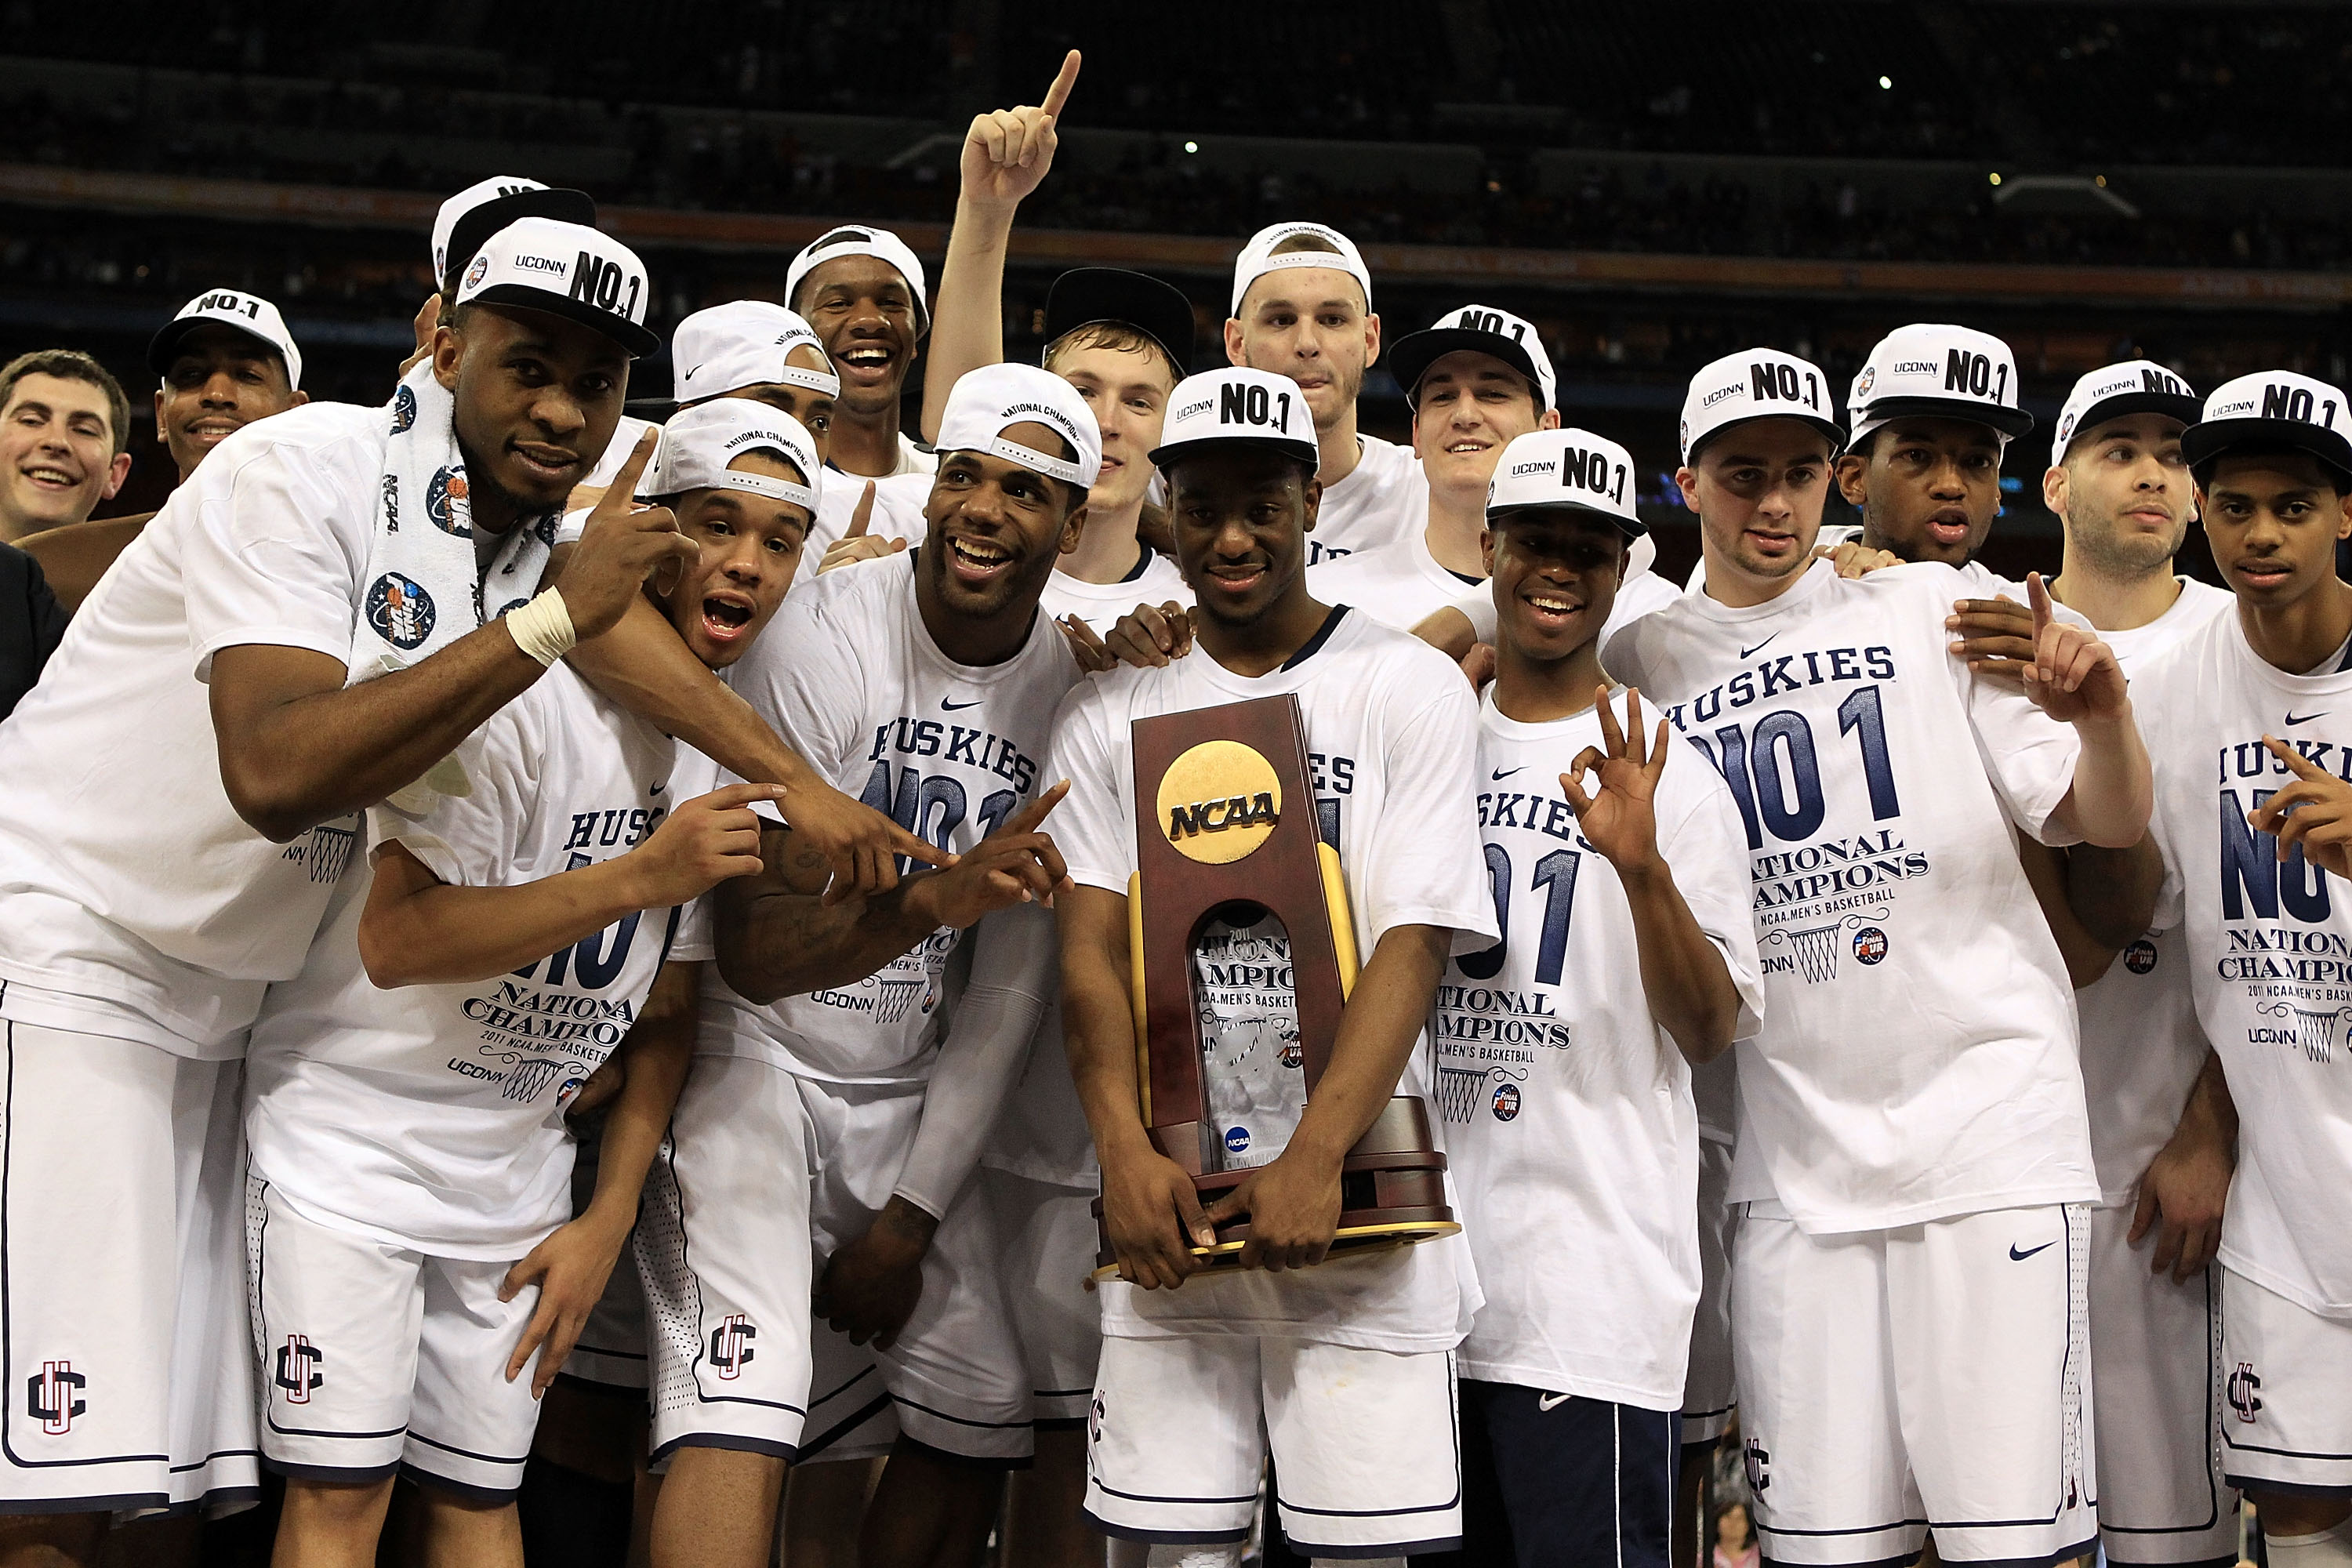 Butler vs. Old Dominion: 2011 NCAA men's first round